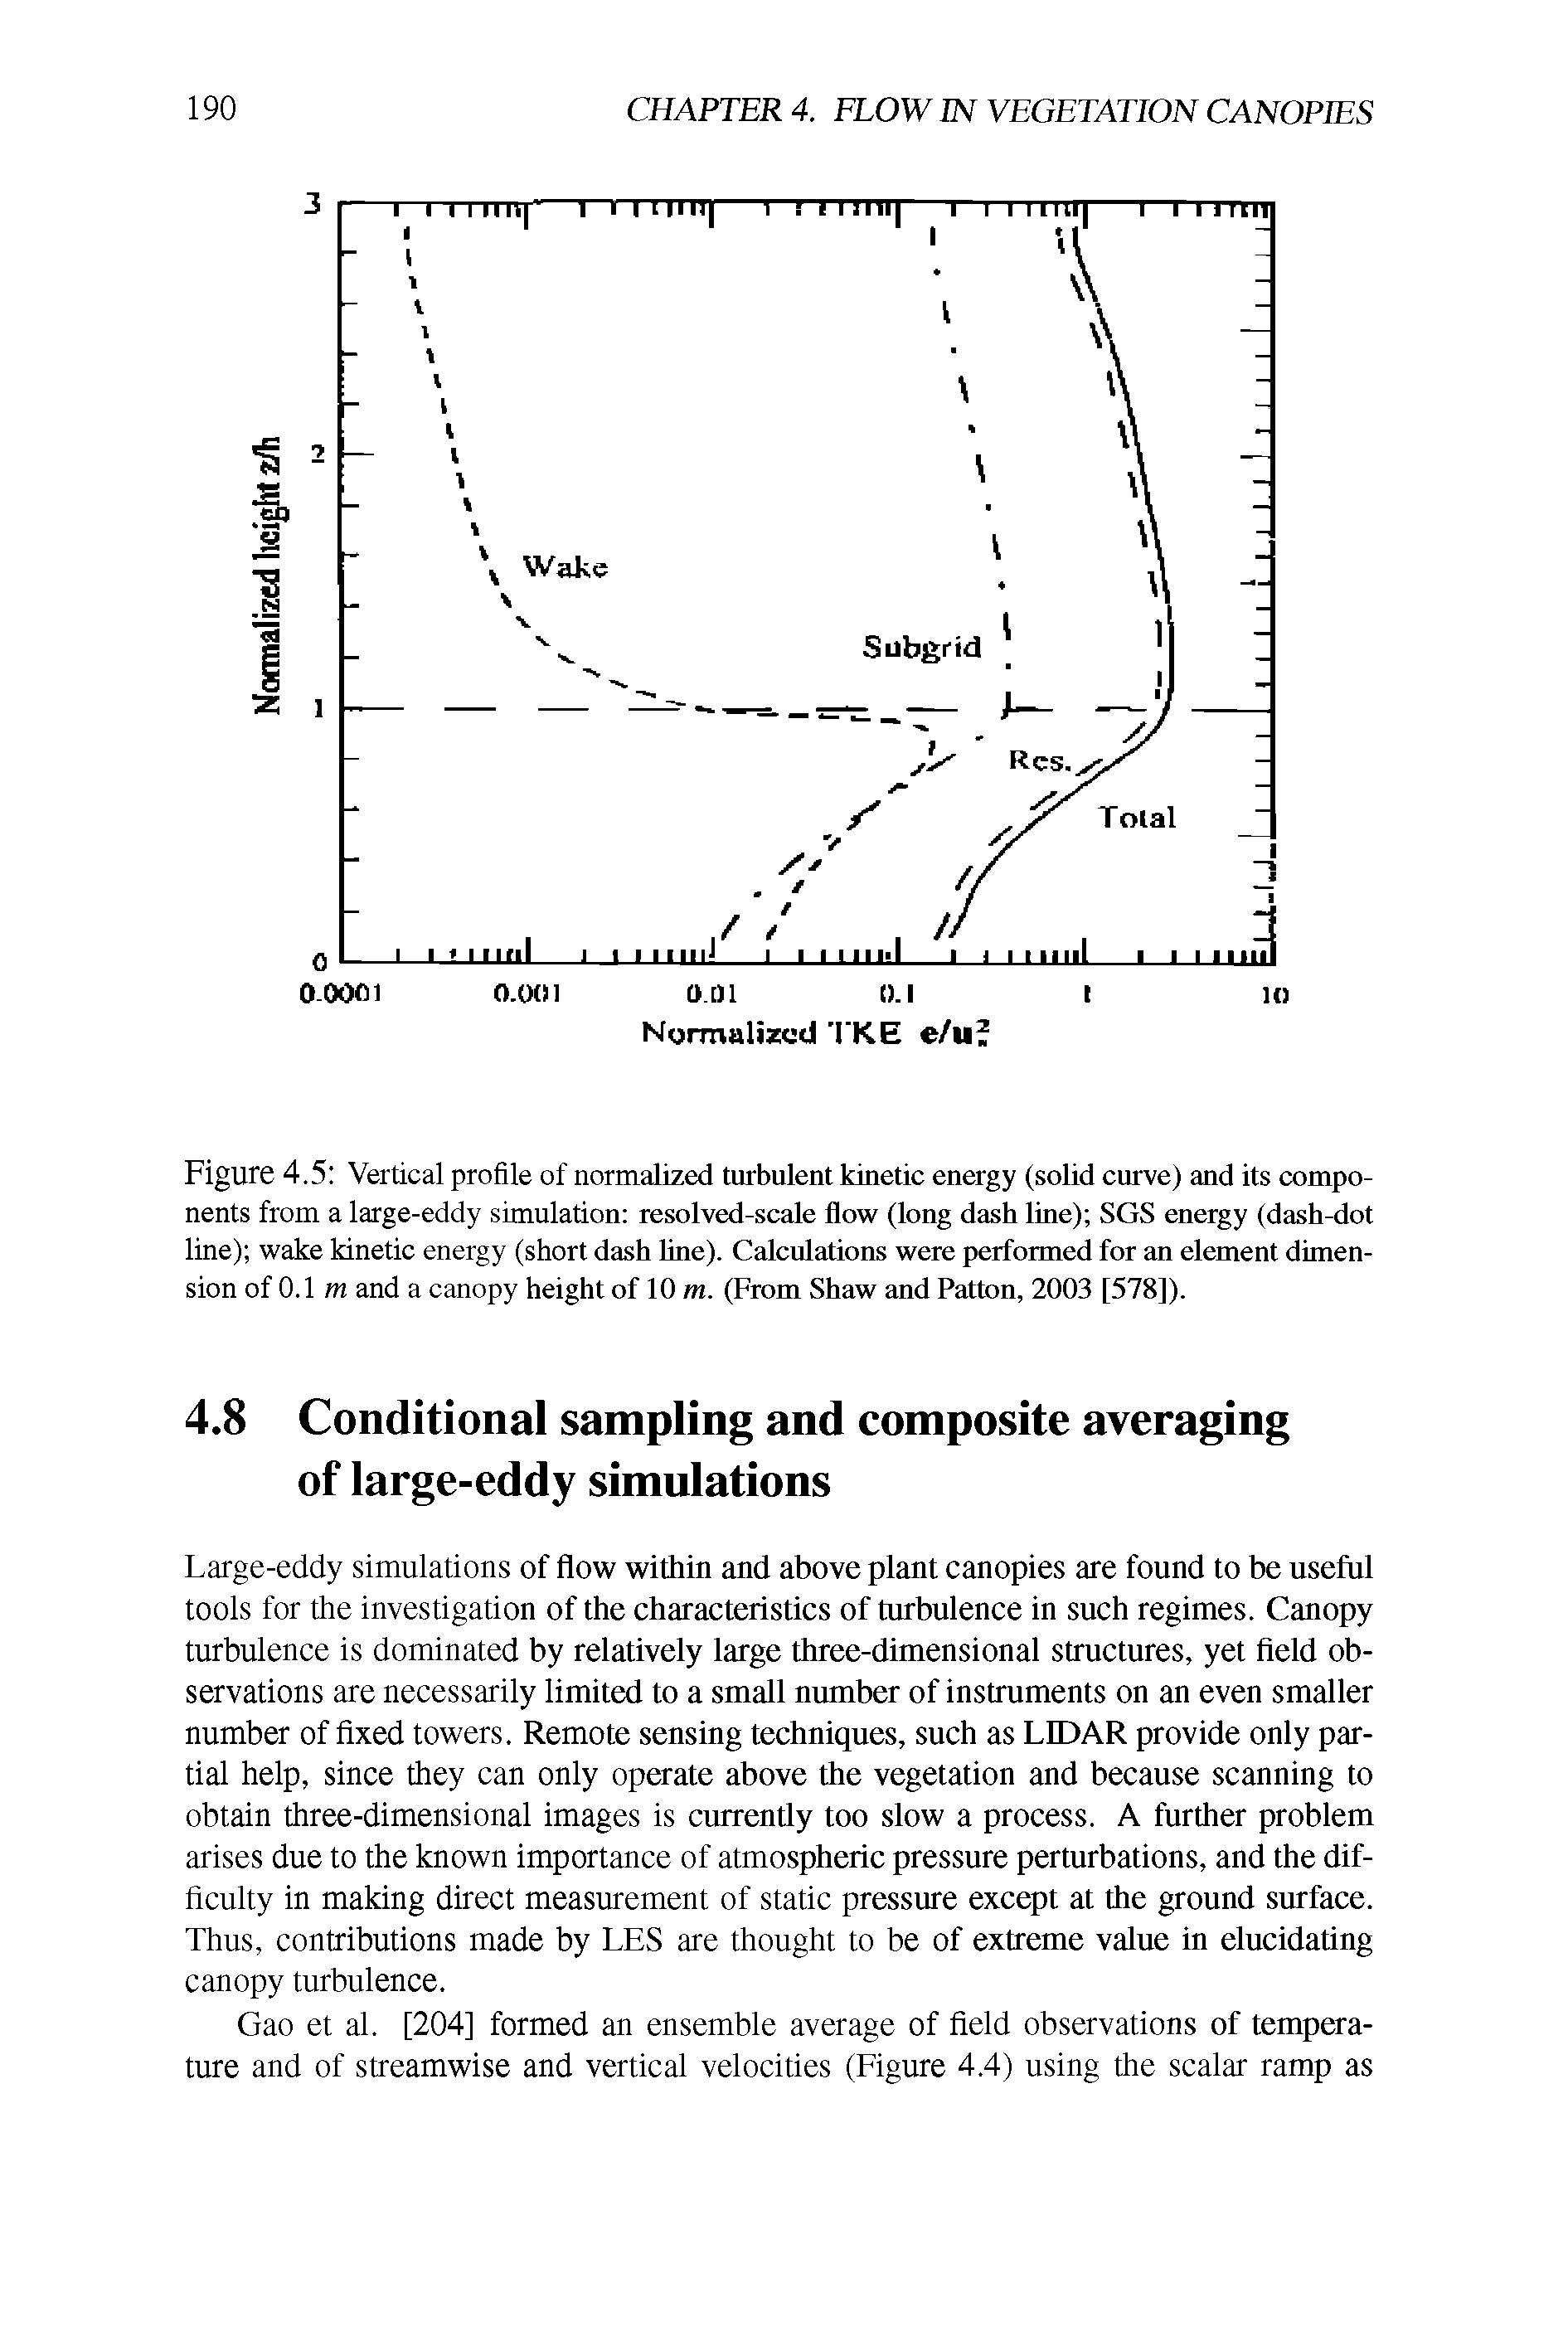 Figure 4.5 Vertical profile of normalized turbulent kinetic energy (solid curve) and its components from a large-eddy simulation resolved-scale flow (long dash line) SGS energy (dash-dot line) wake kinetic energy (short dash line). Calculations were performed for an element dimension of 0.1 m and a canopy height of 10 m. (From Shaw and Patton, 2003 [578]).